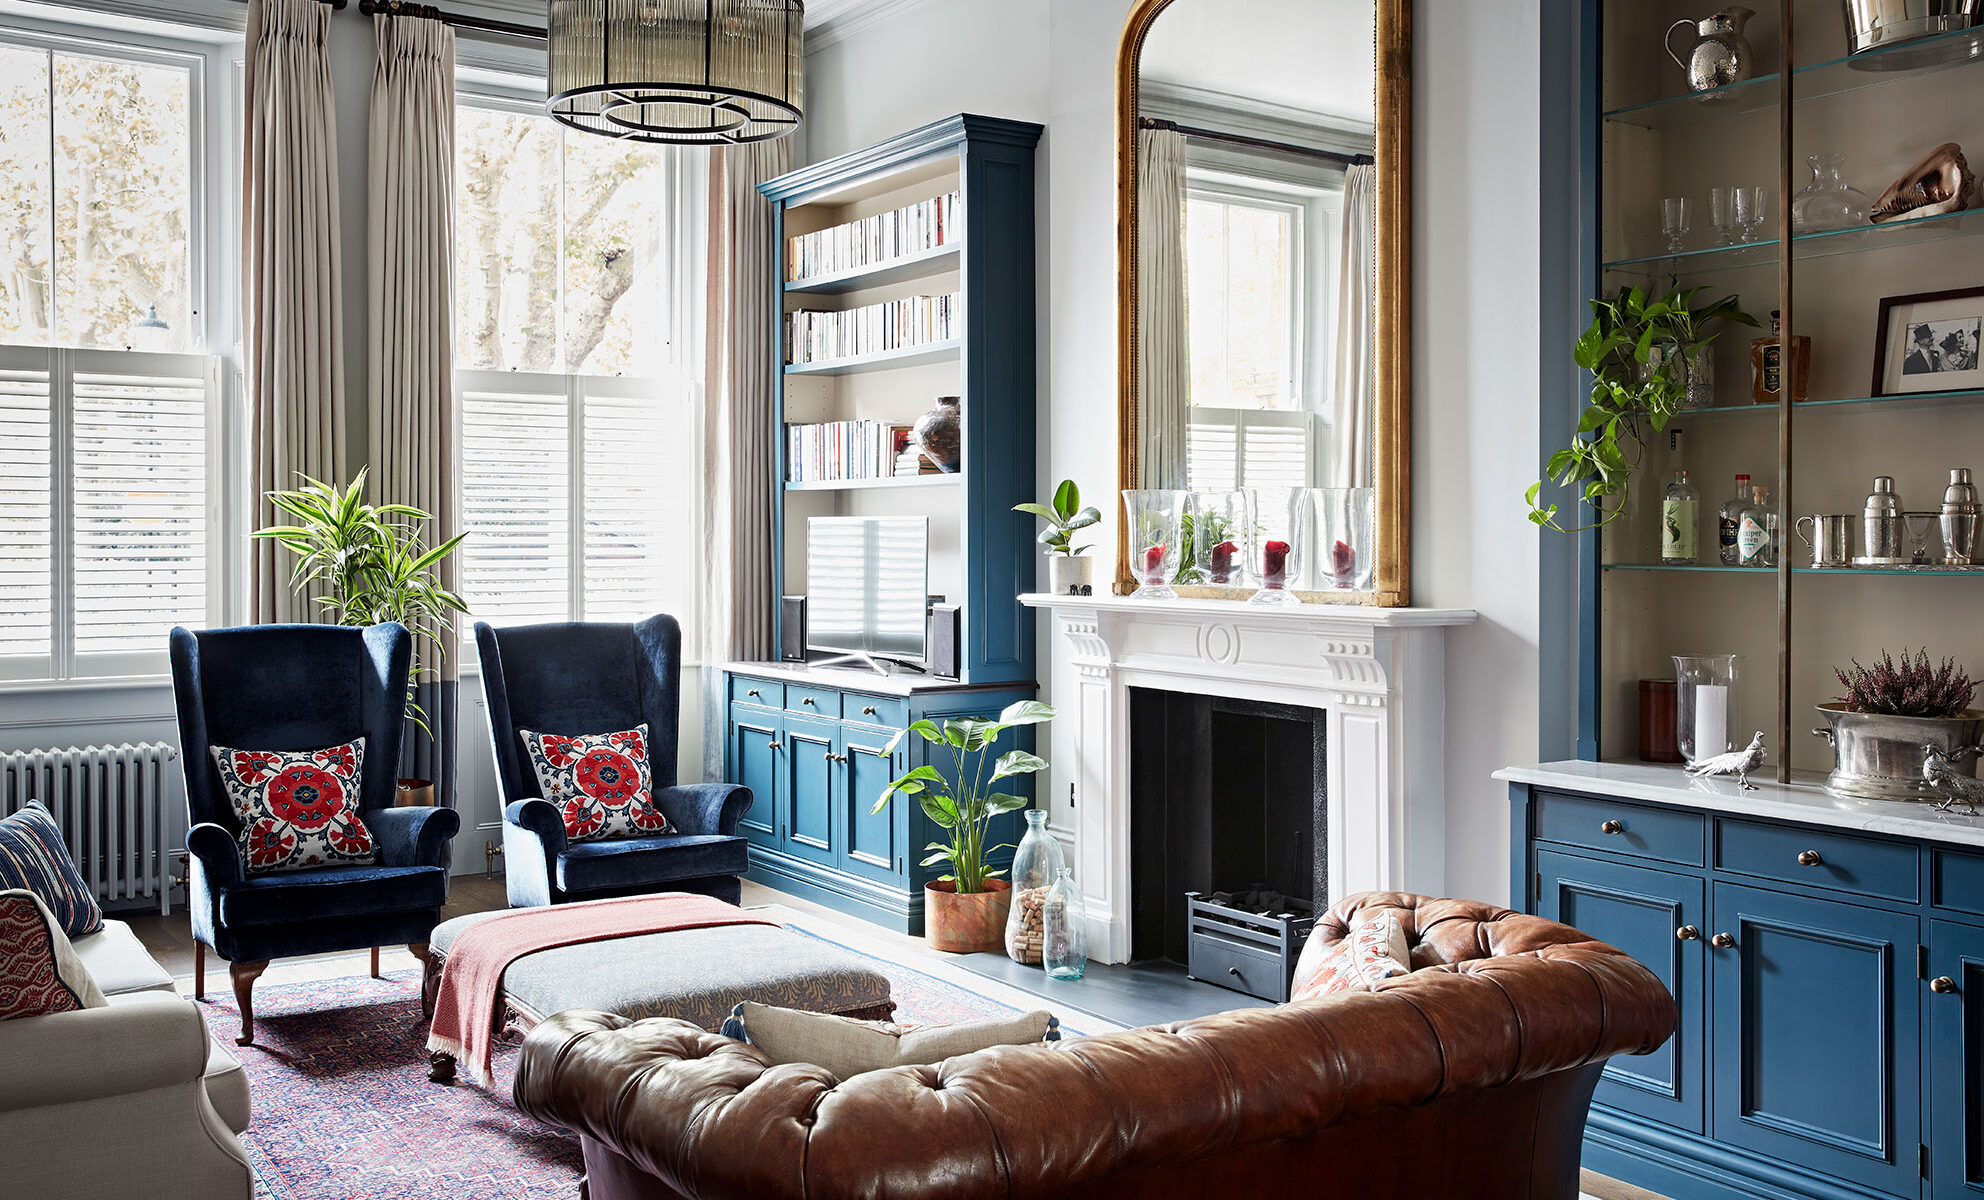 The 6 most beautiful London townhouses from the Vogue Living archives   Vogue Australia